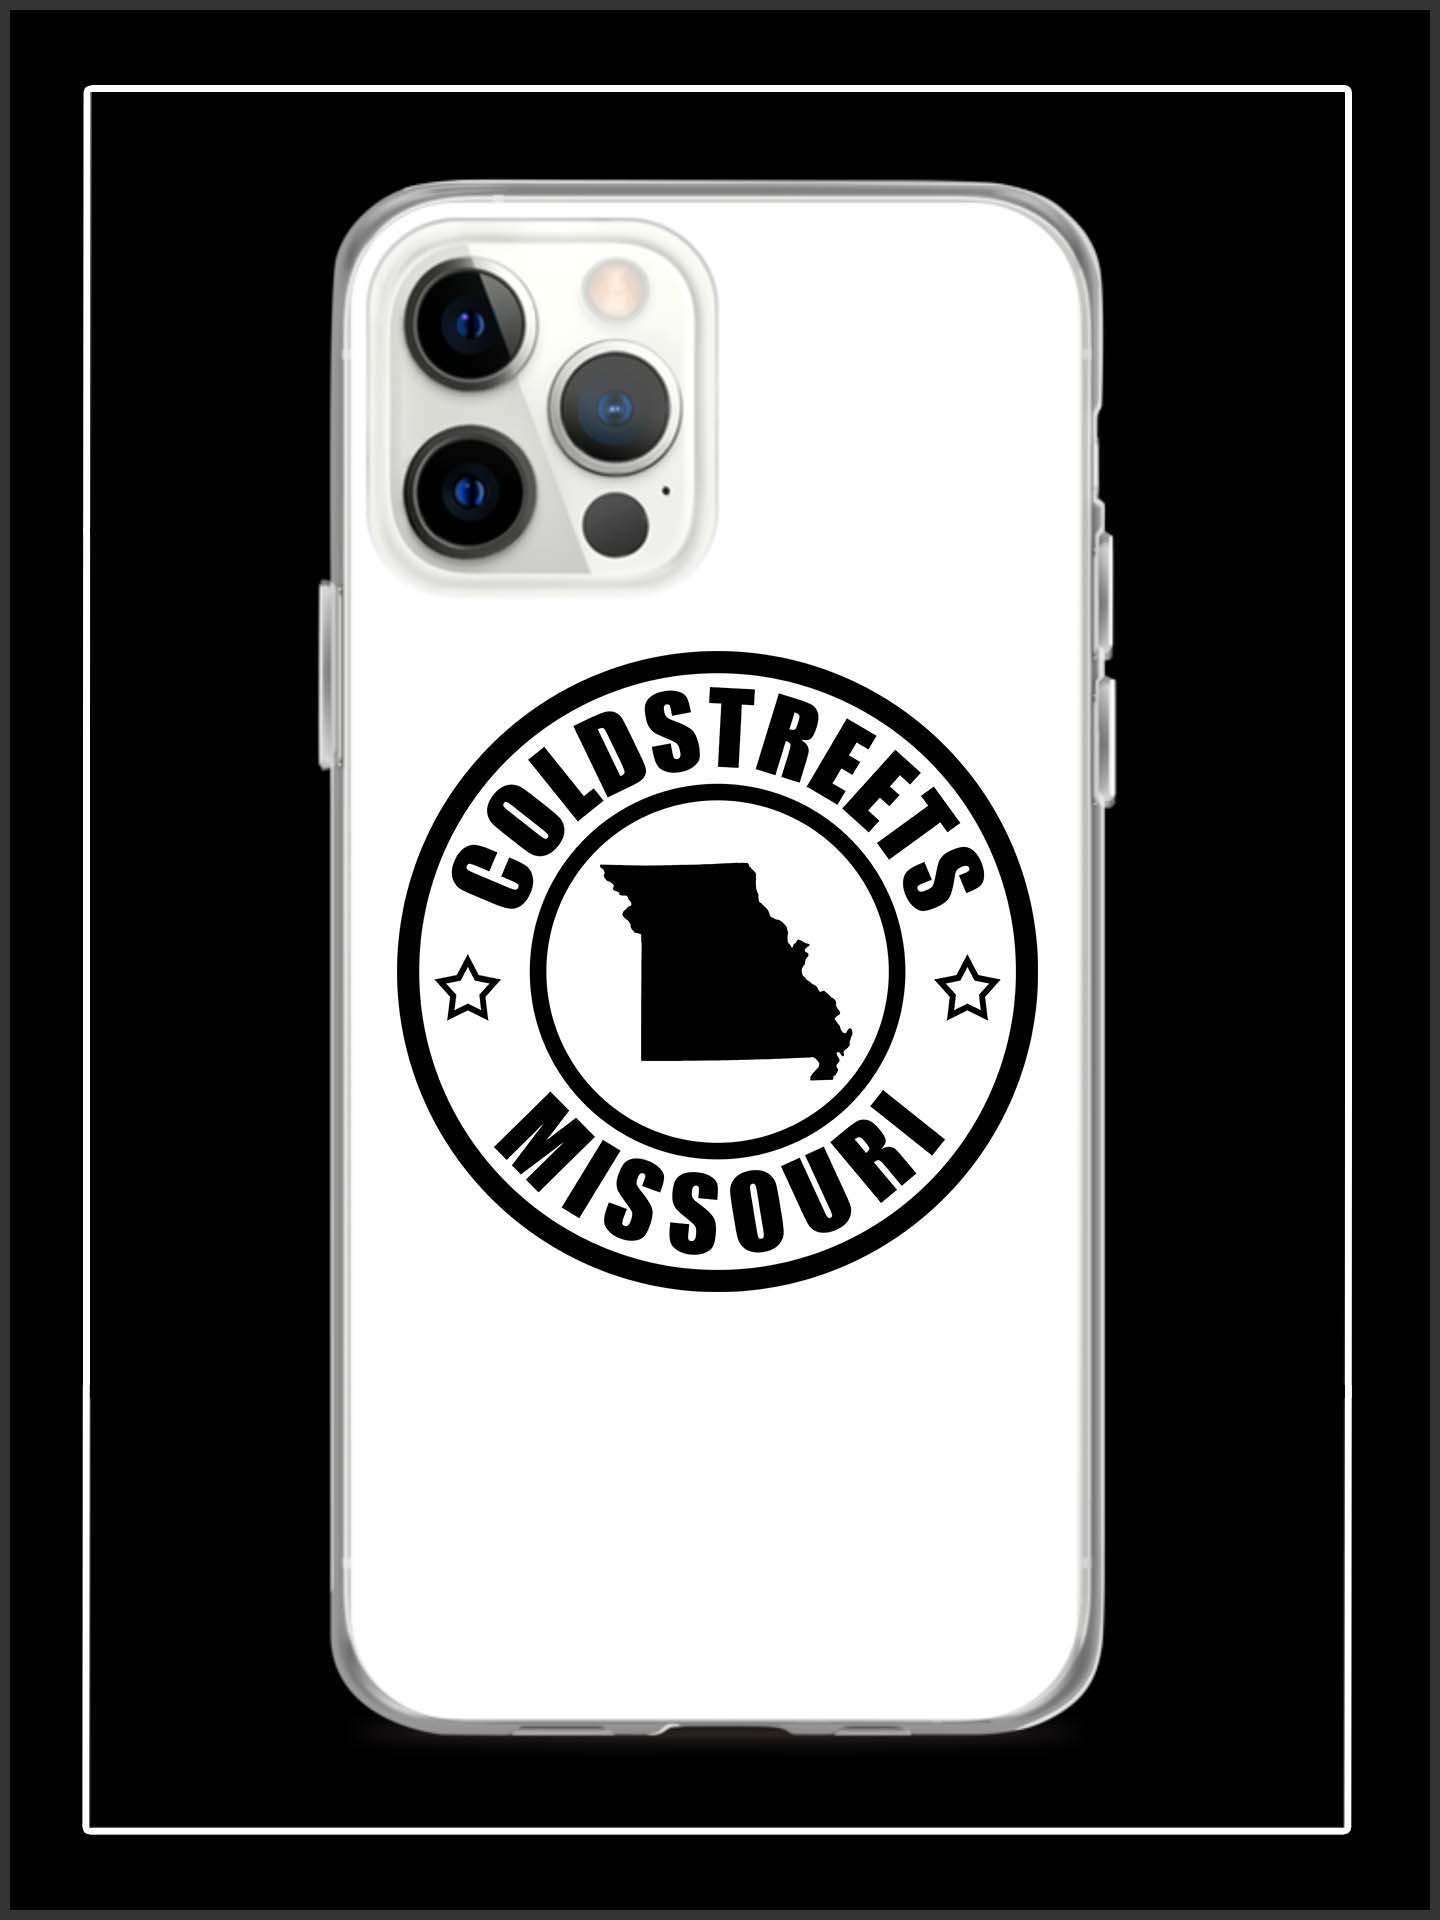 Cold Streets Missouri iPhone Cases